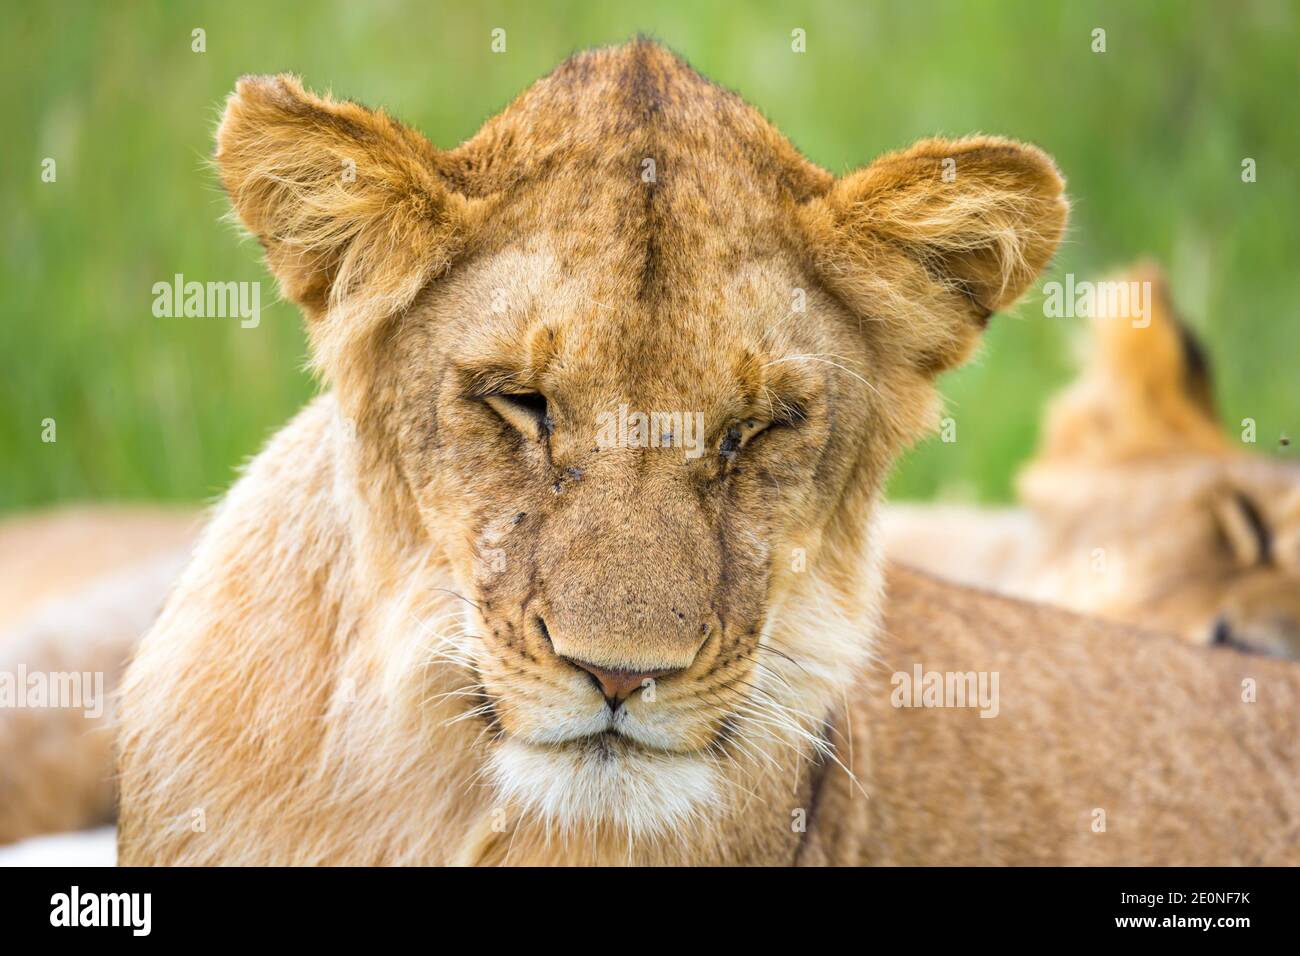 One young lion in close-up, the face of a nearly sleeping lion. Stock Photo